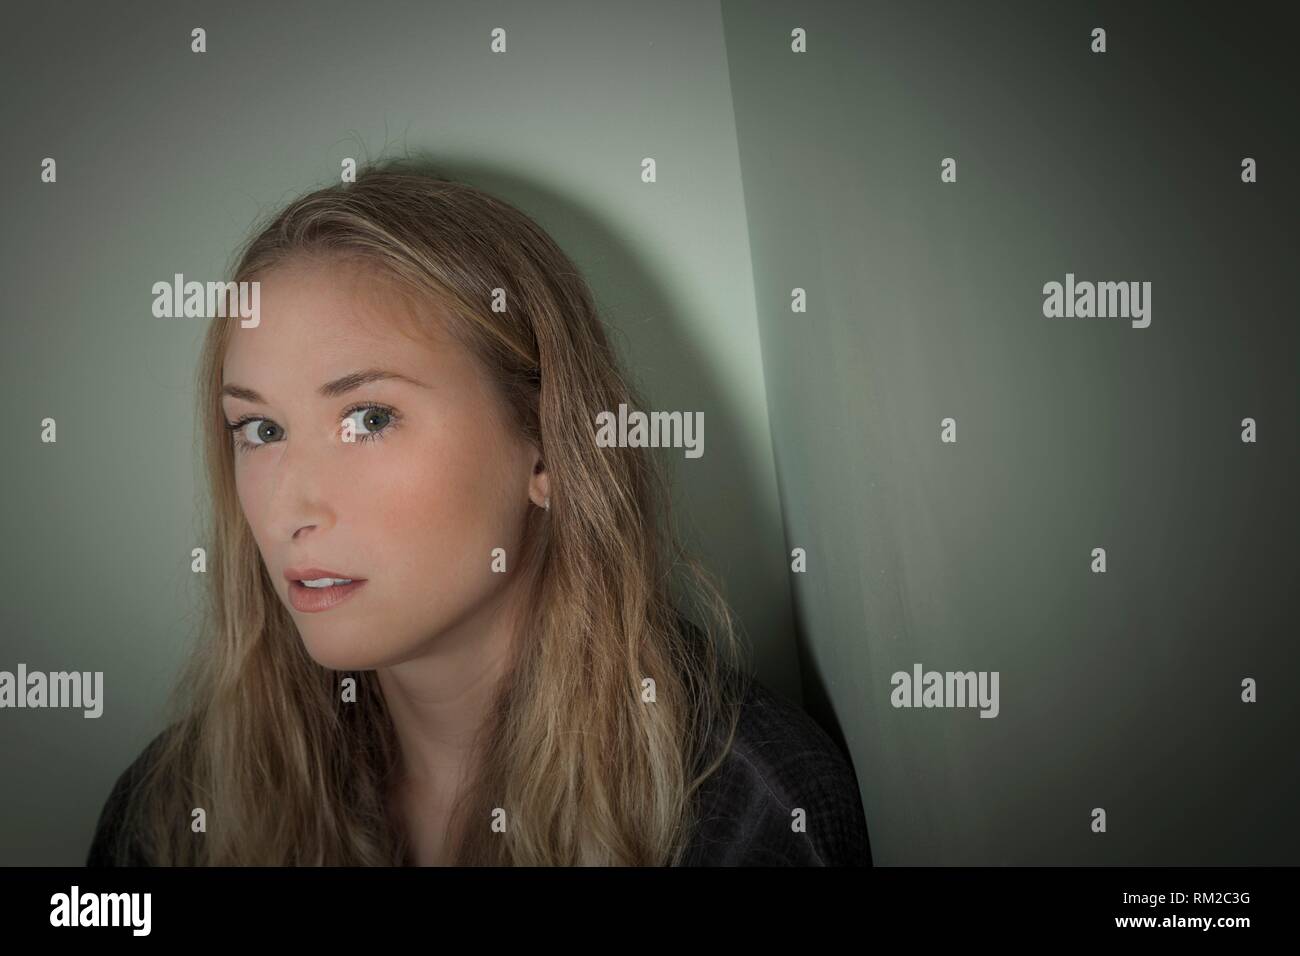 Young mysterious blonde woman looking into the camera. Stock Photo